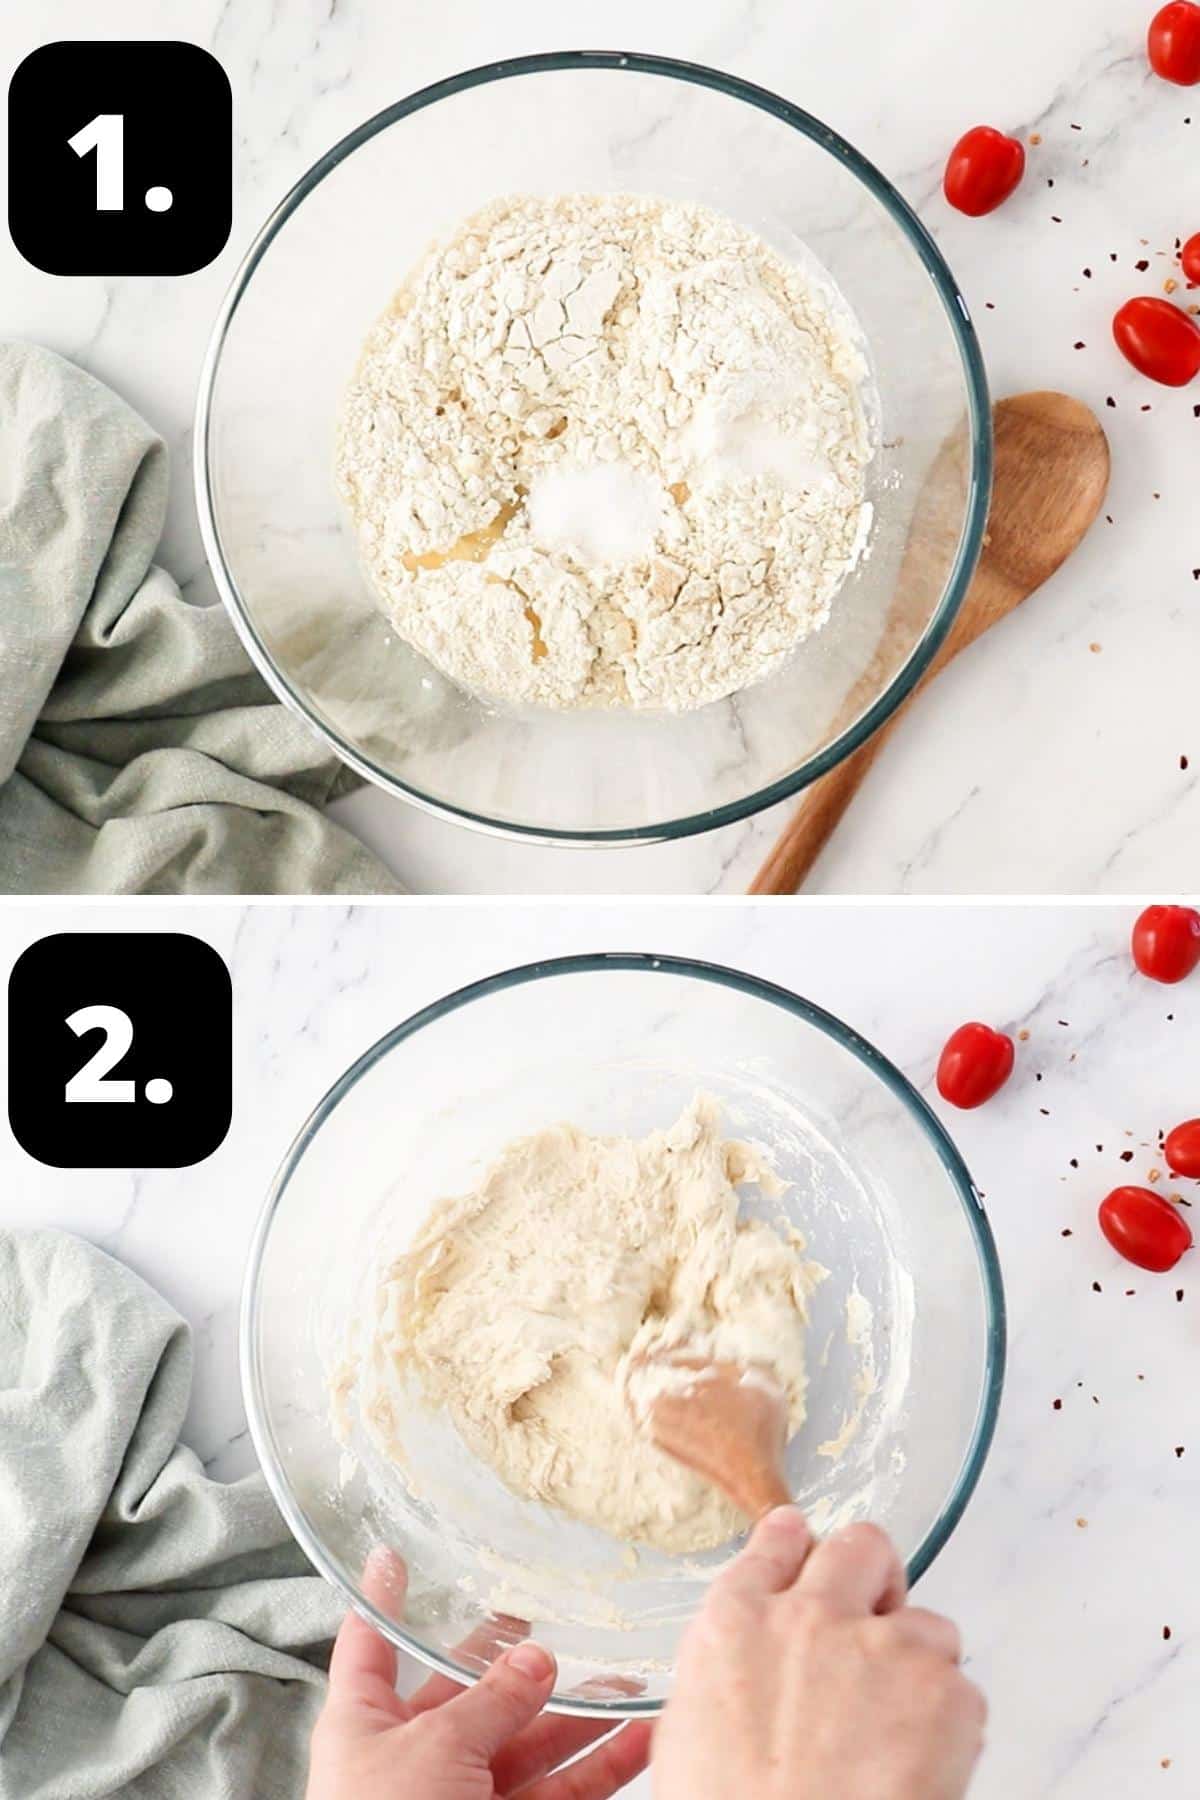 Steps 1-2 of preparing this recipe - the dry ingredients in a glass bowl and mixing the dough with a wooden spoon.